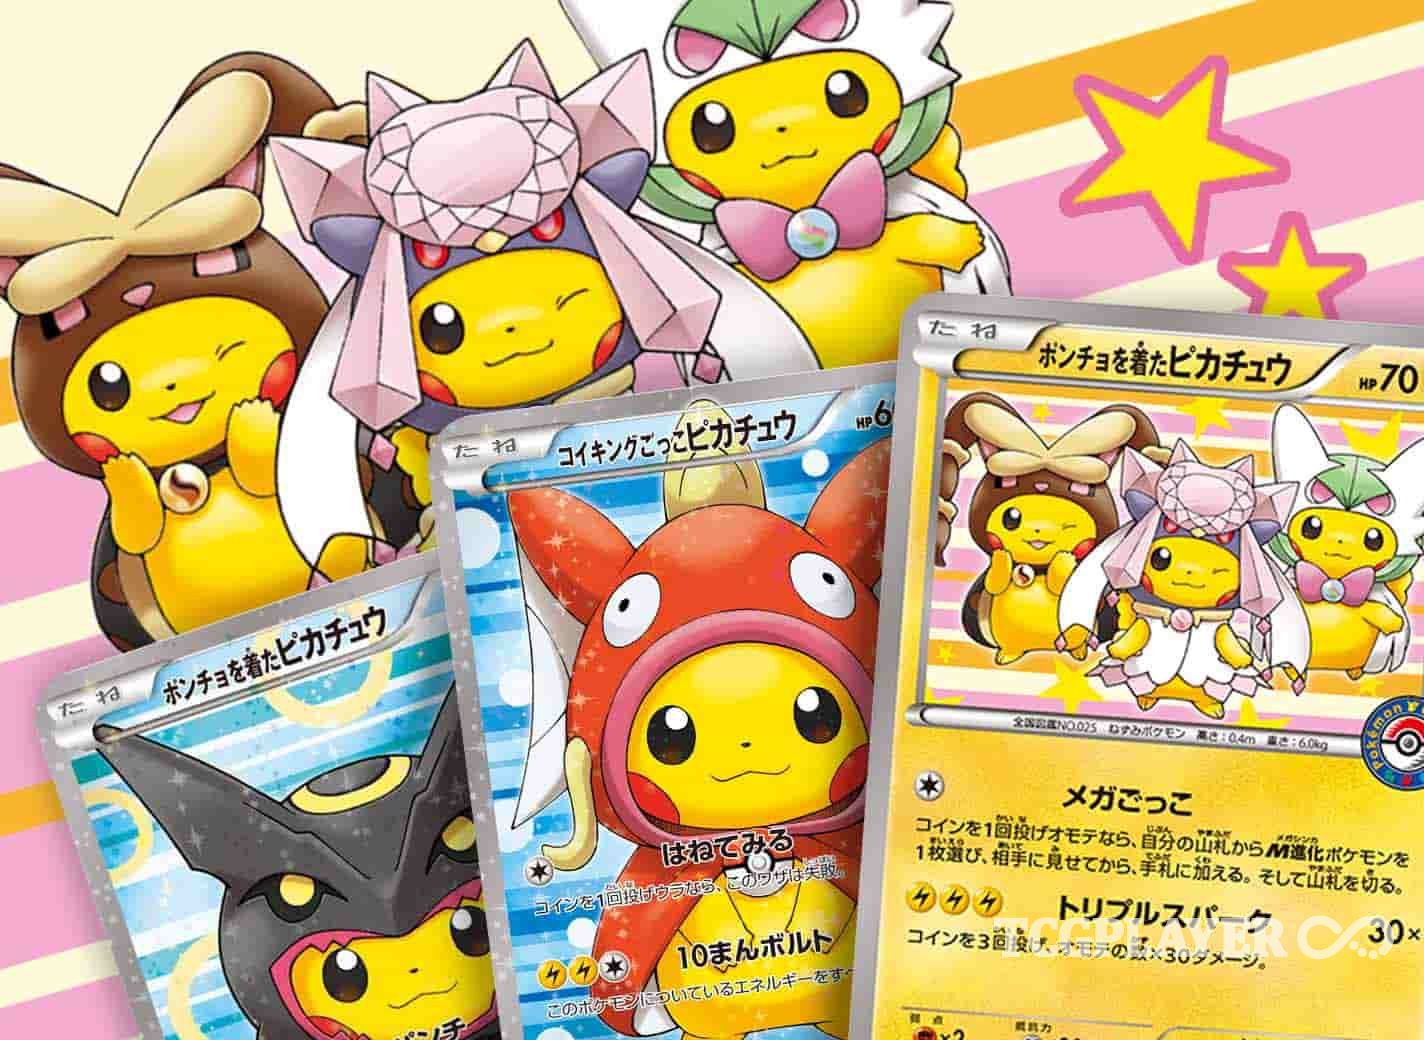 What Are Poncho Pikachu Promo Cards?